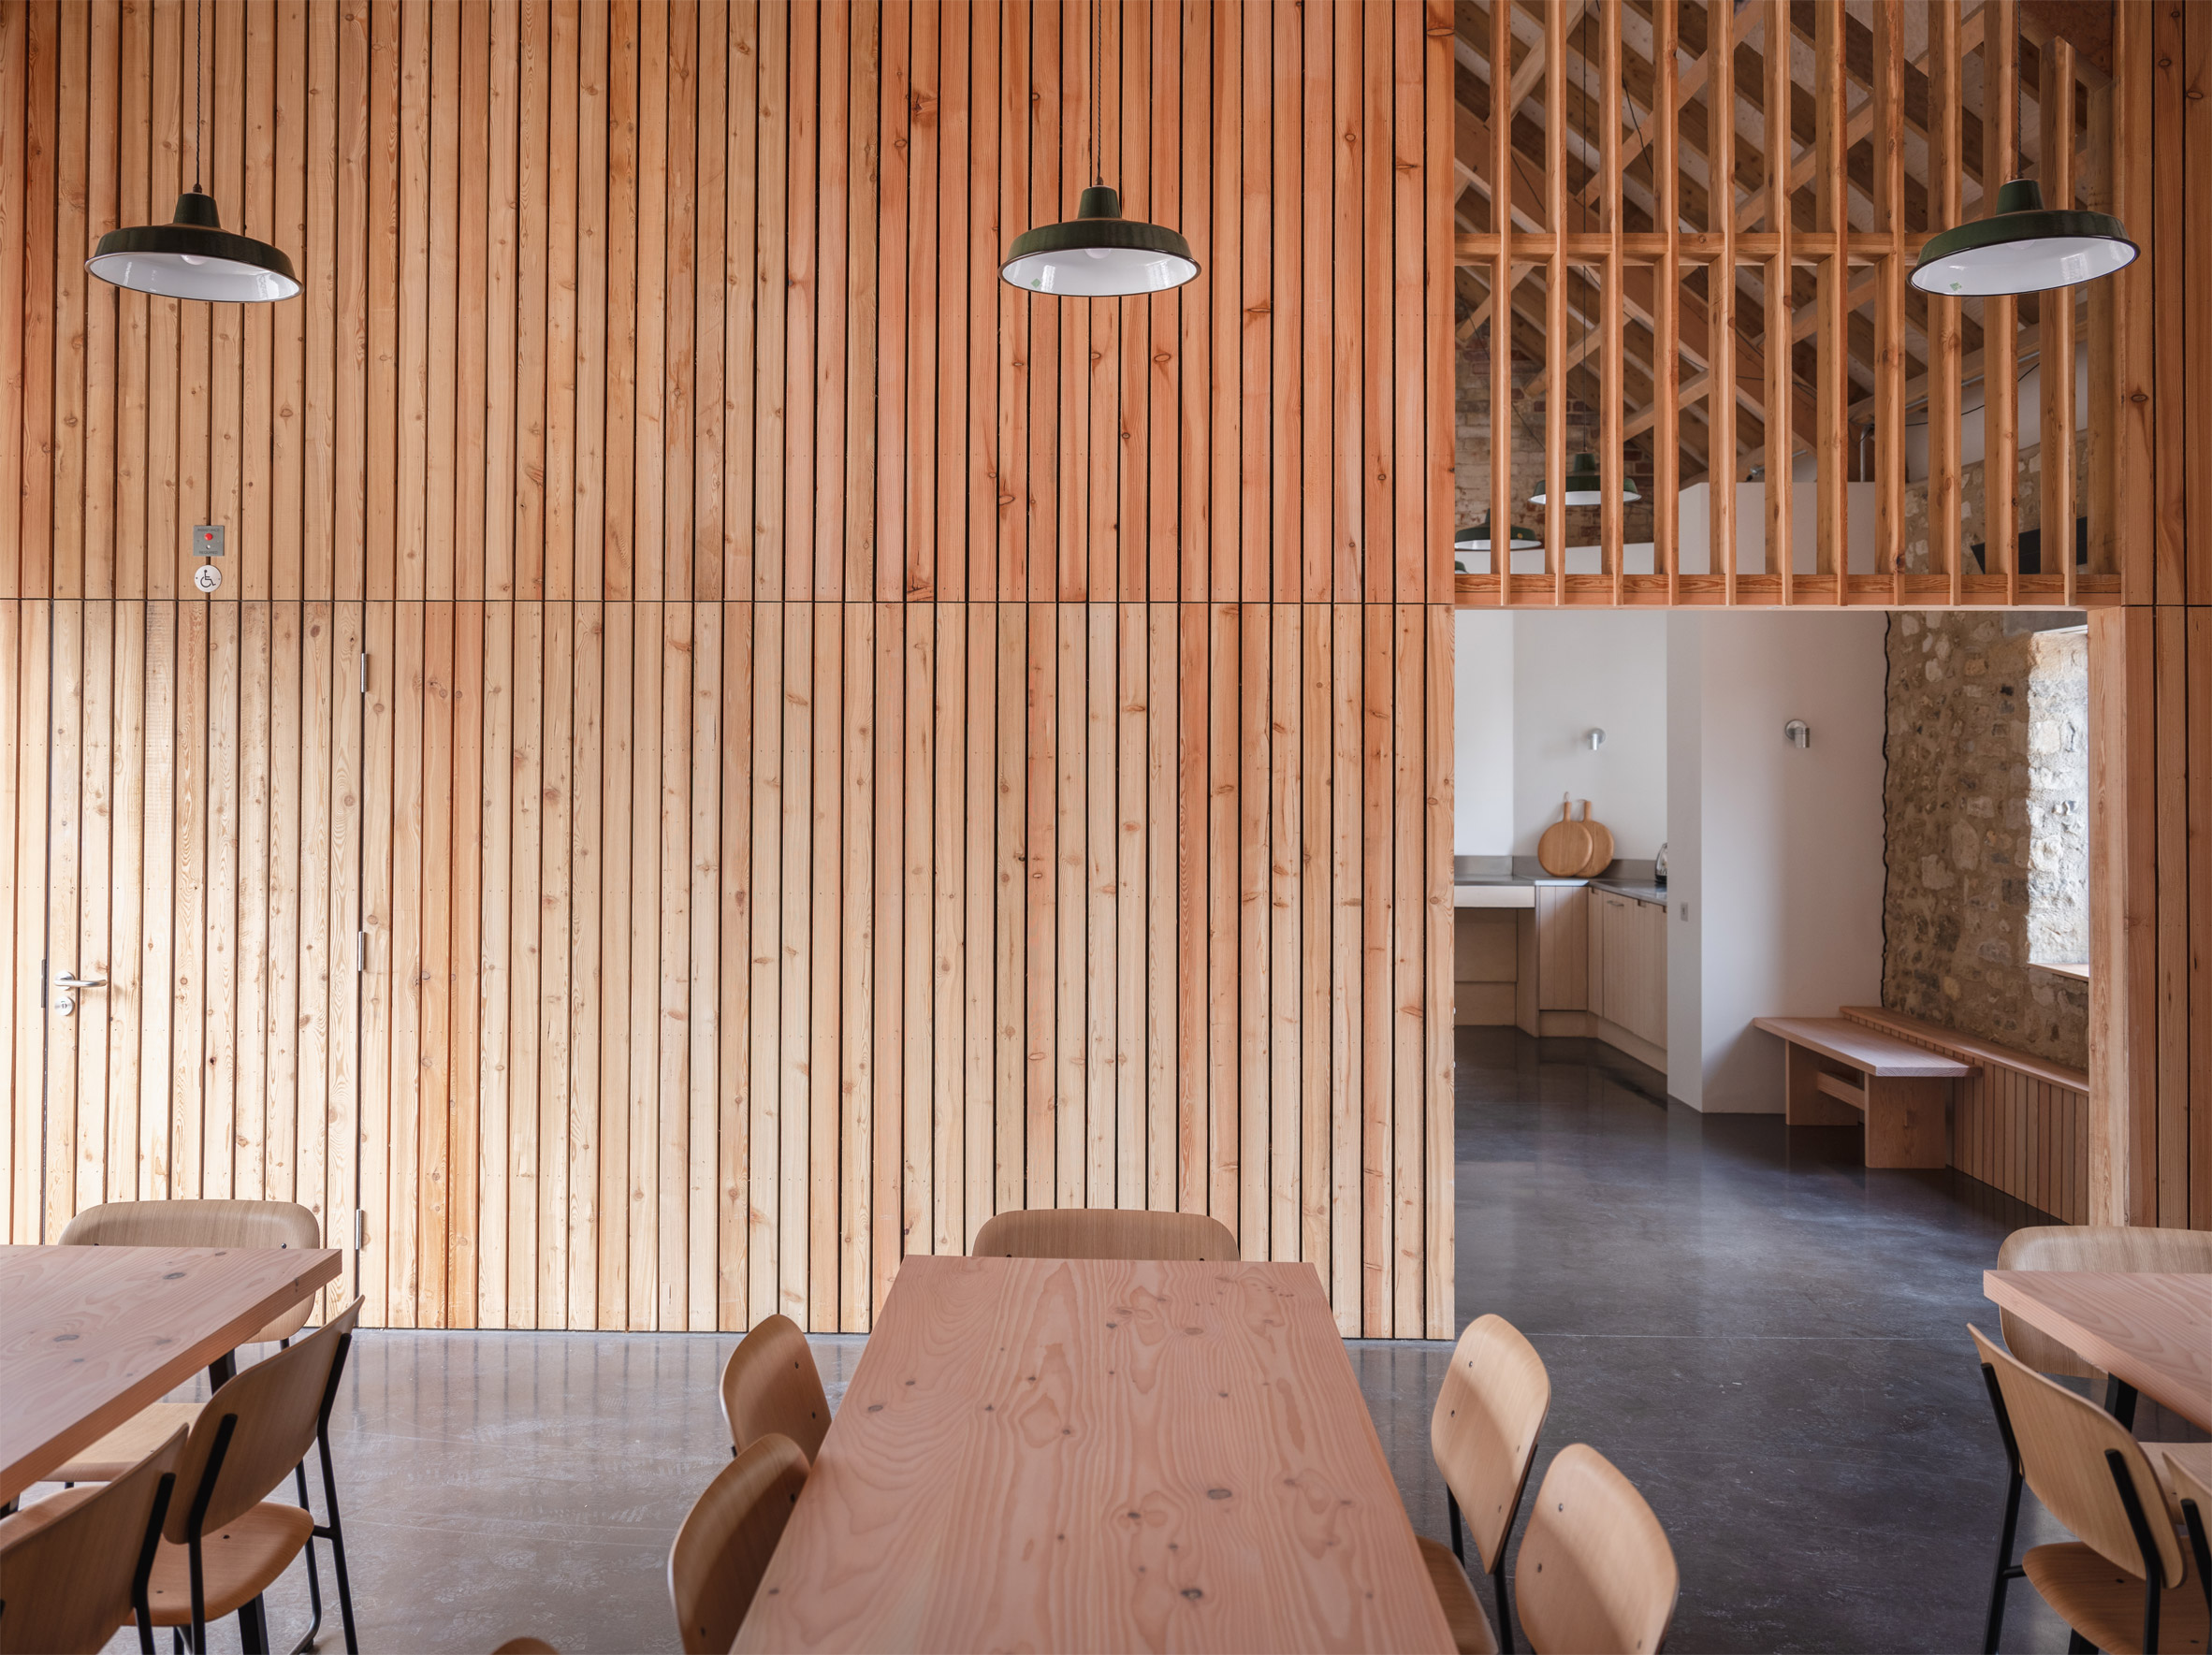 Wood-lined community space by Clementine Blakemore Architects